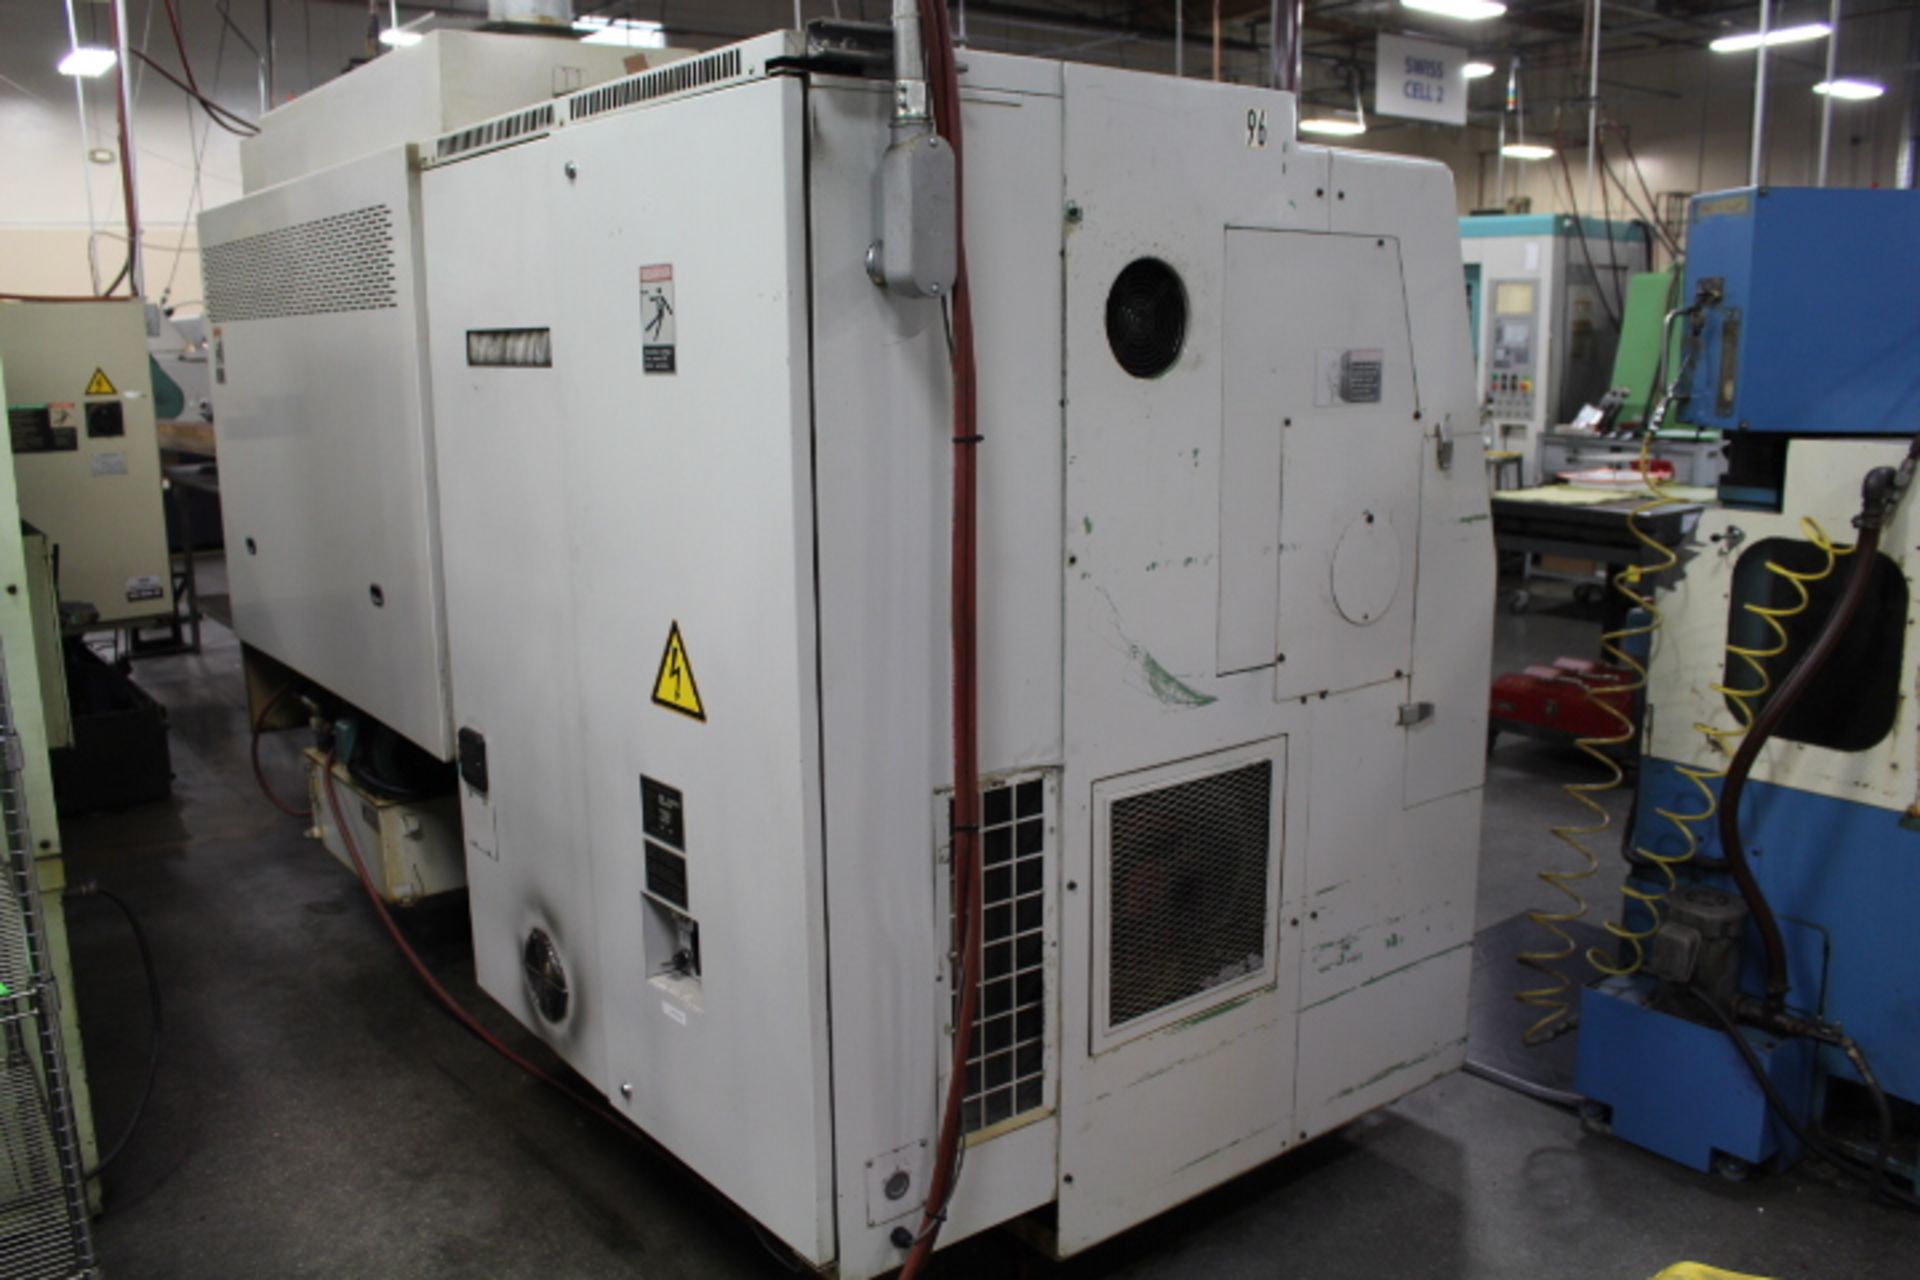 MORI SEIKI ZL-15 MC CNC TURNING CENTER, MF-D6 CNC CONTROL, C AXIS SPINDLE, MILLING / DRILLING - Image 11 of 12